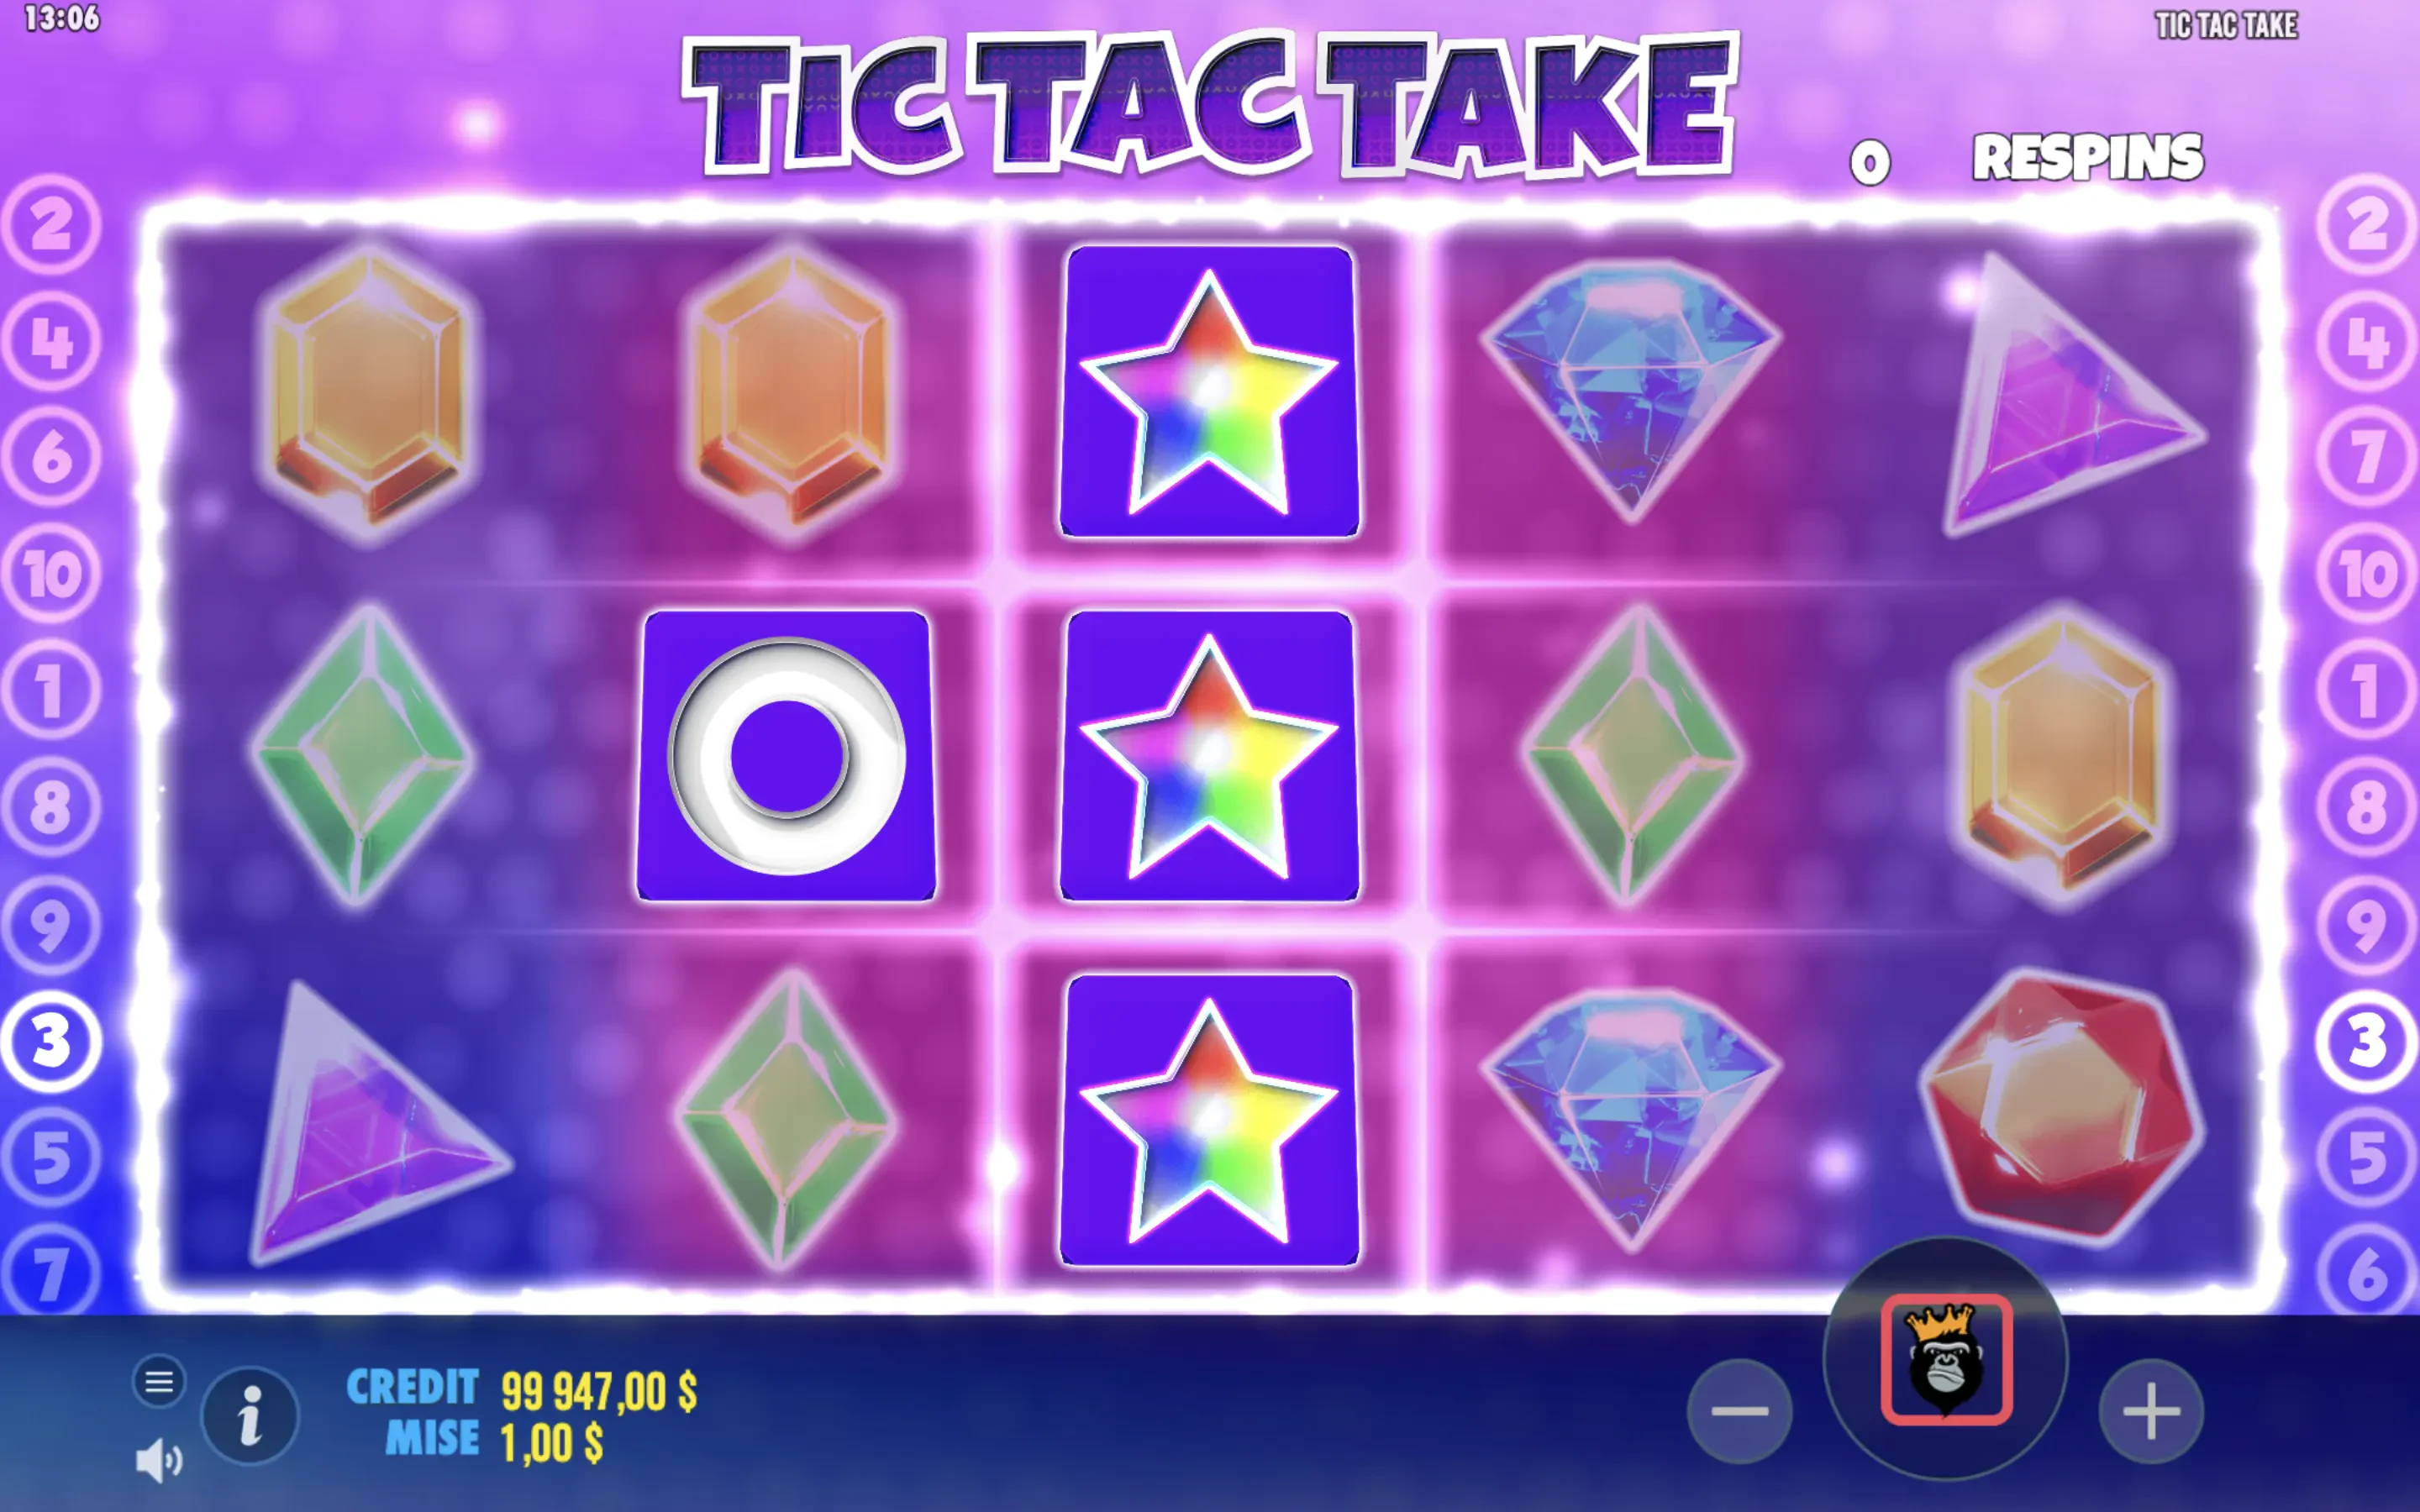 The respin feature in Tic Tac Take